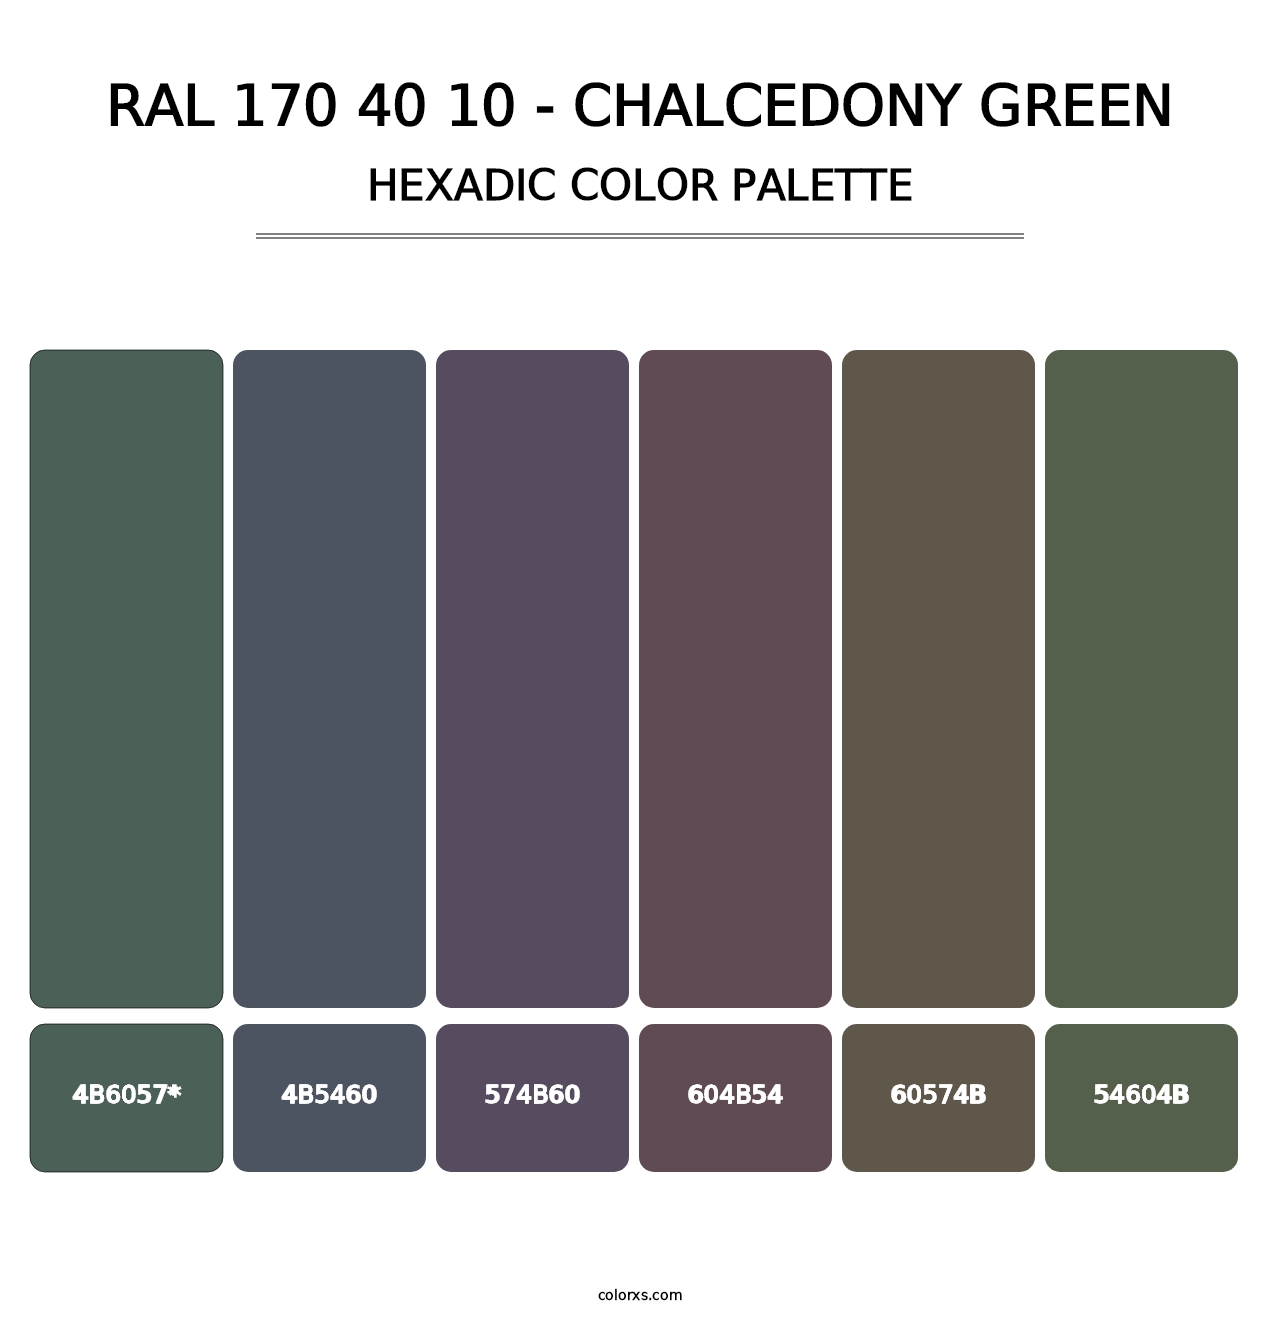 RAL 170 40 10 - Chalcedony Green - Hexadic Color Palette